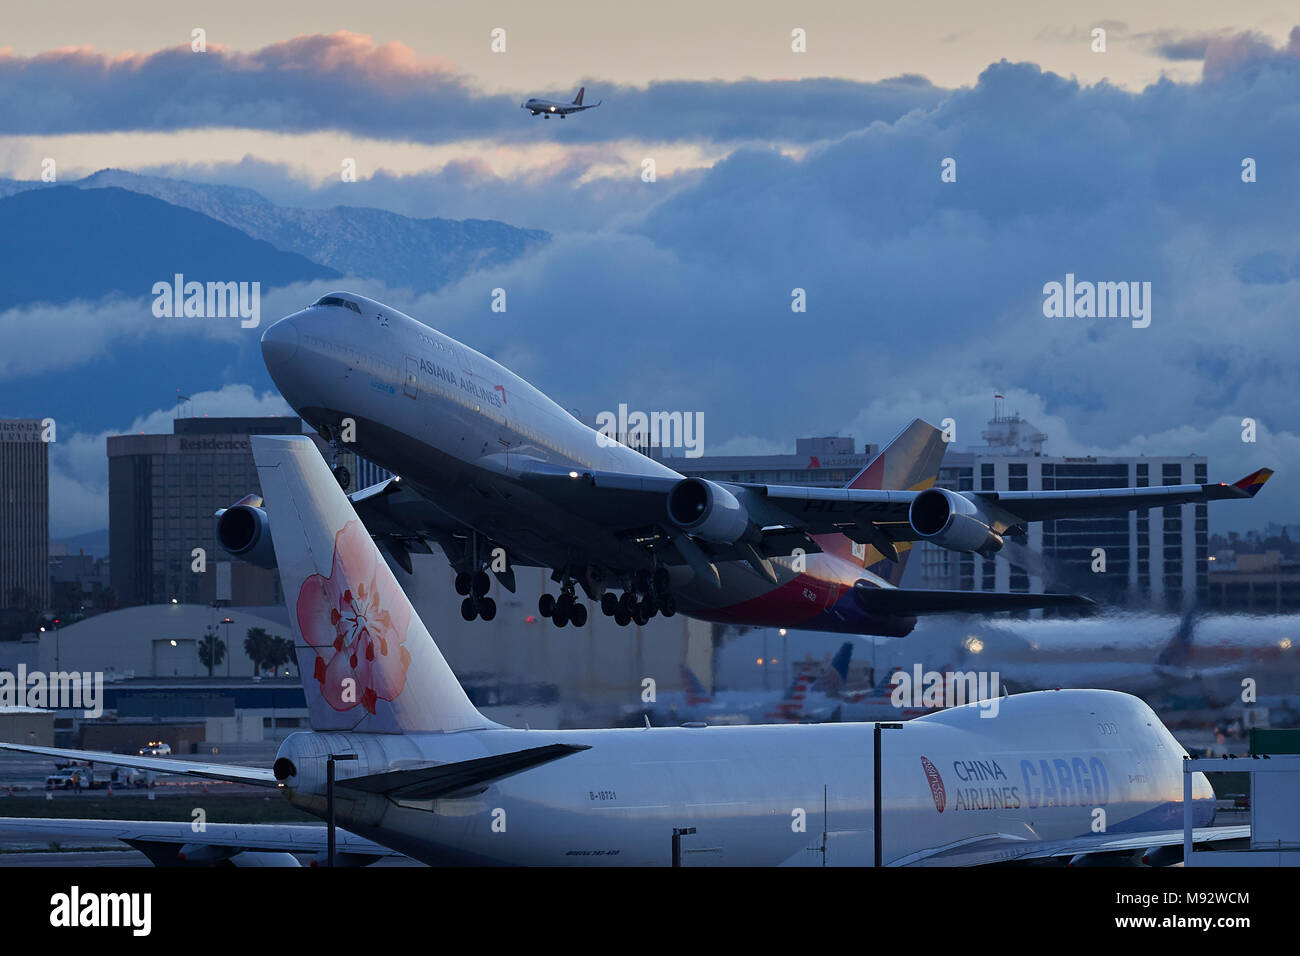 Asiana Airlines Boeing 747-400 Passenger Jet Taking Off From Los Angeles International Airport, LAX, At Dawn. Clouds Covering The City Behind. Stock Photo